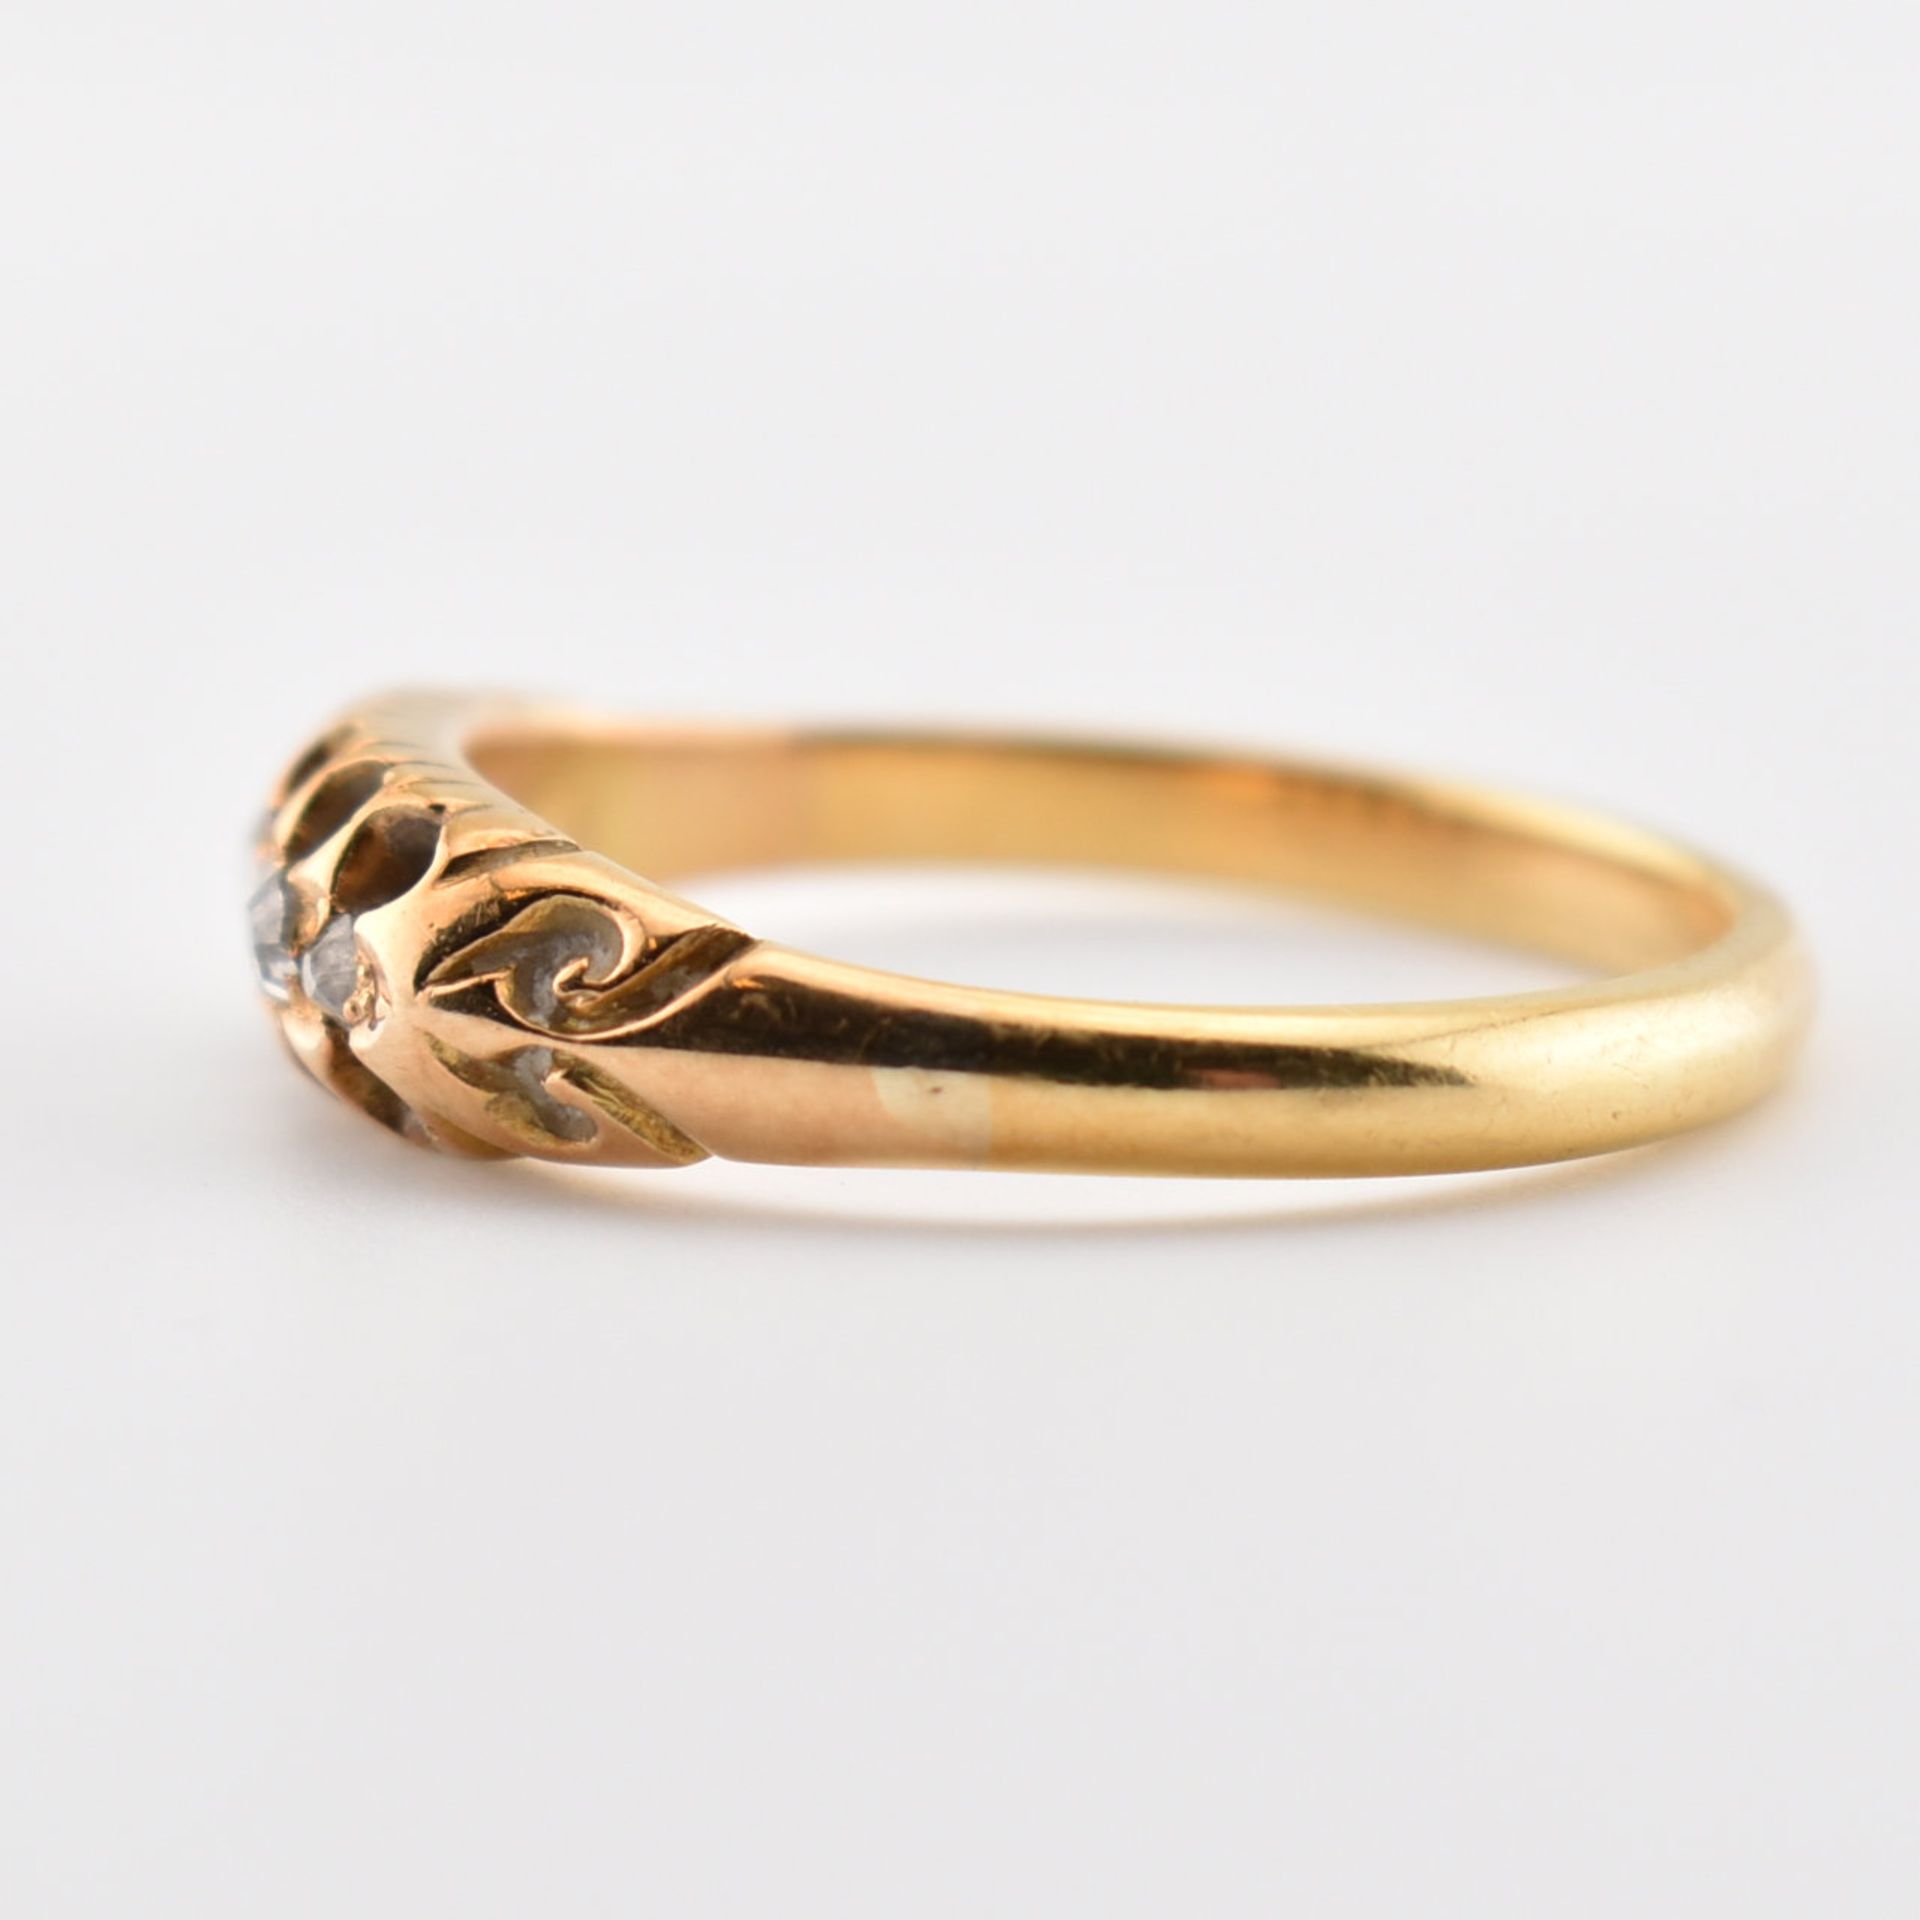 18CT GOLD & DIAMOND FIVE STONE RING - Image 4 of 6